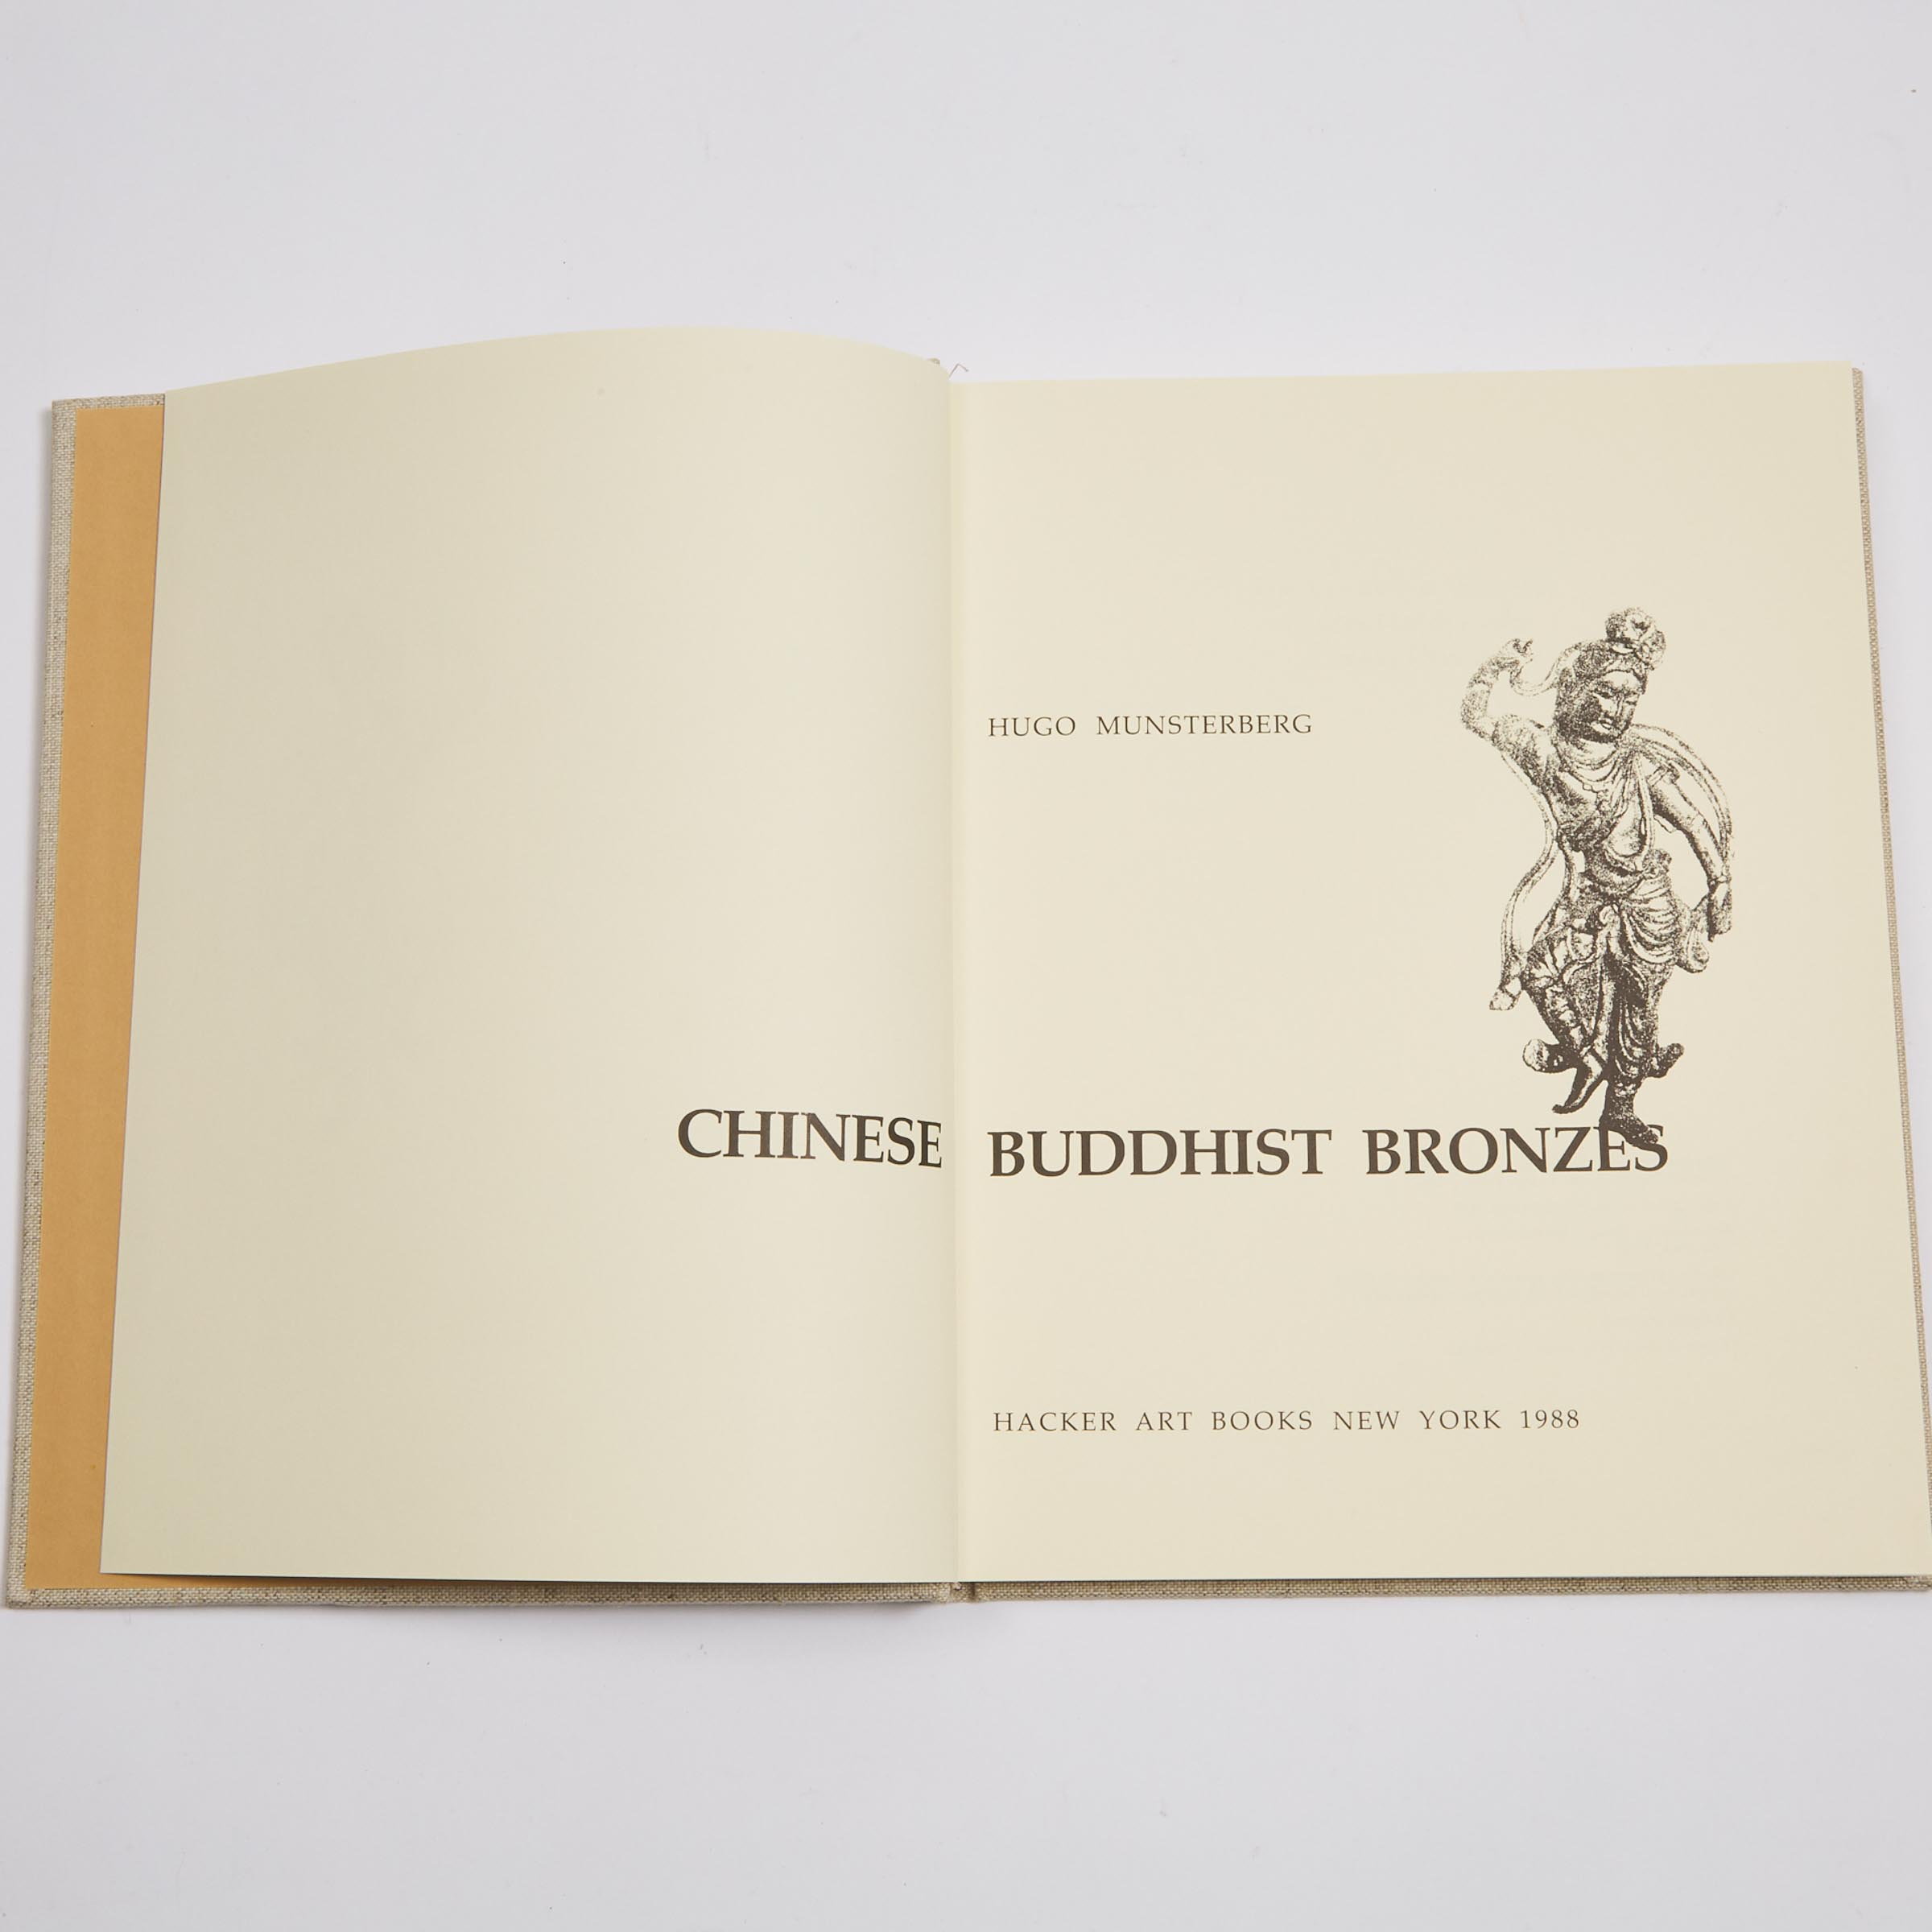 A Group Eight of Rare Chinese and Asian Art Reference Books and Catalogues, 1912-1988